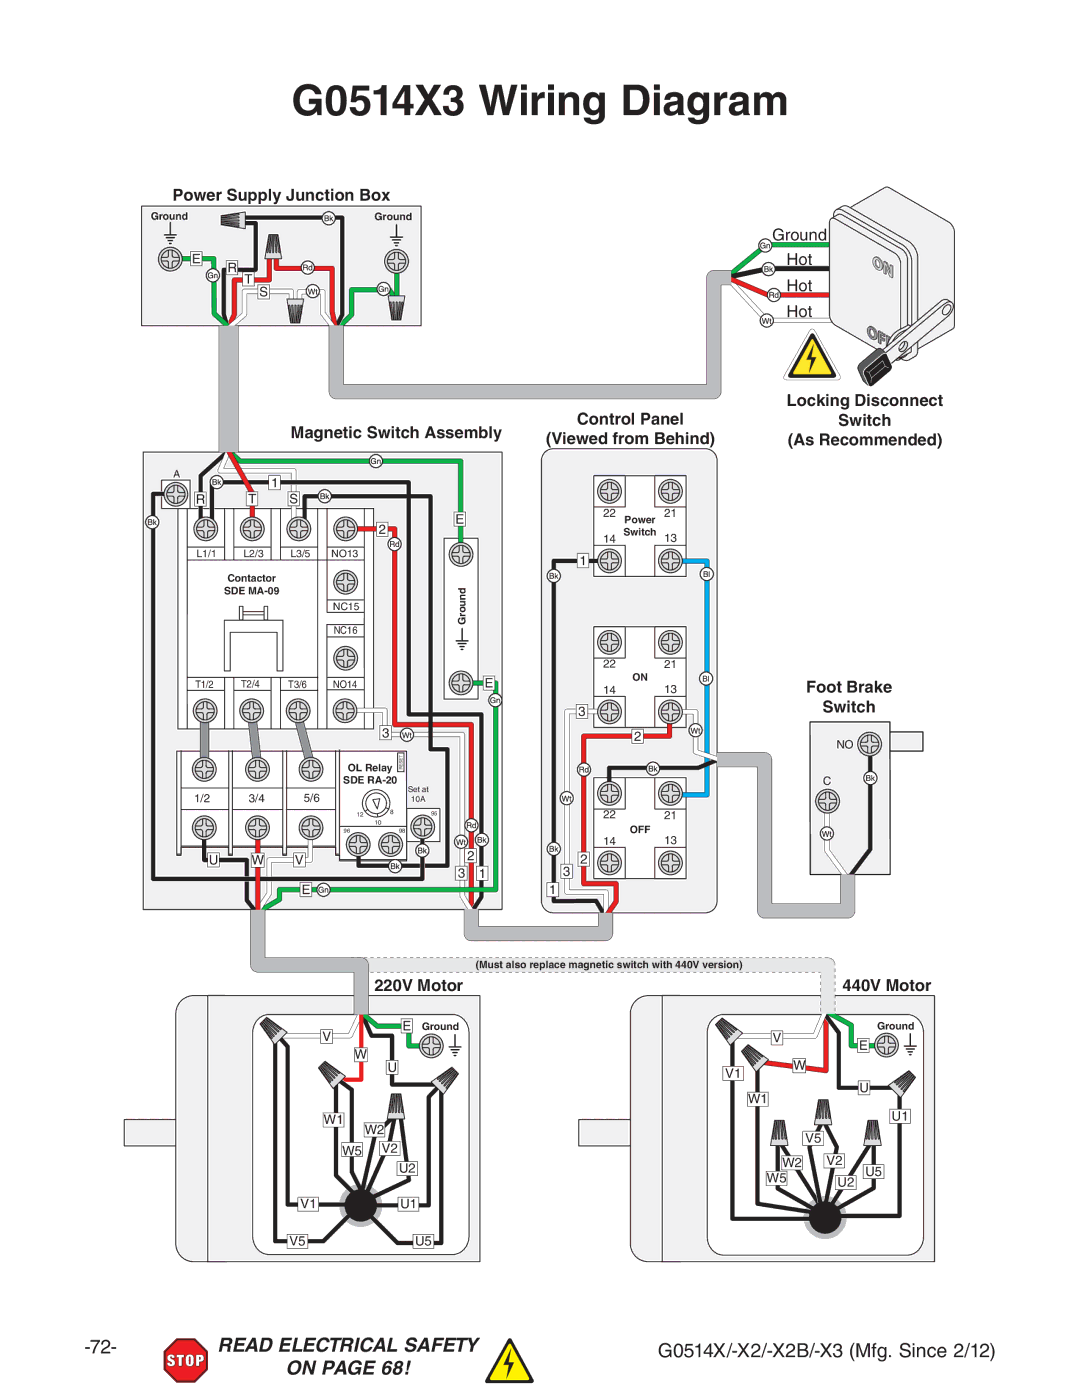 Grizzly owner manual G0514X3 Wiring Diagram, Magnetic Switch Assembly Control Panel Viewed from Behind 